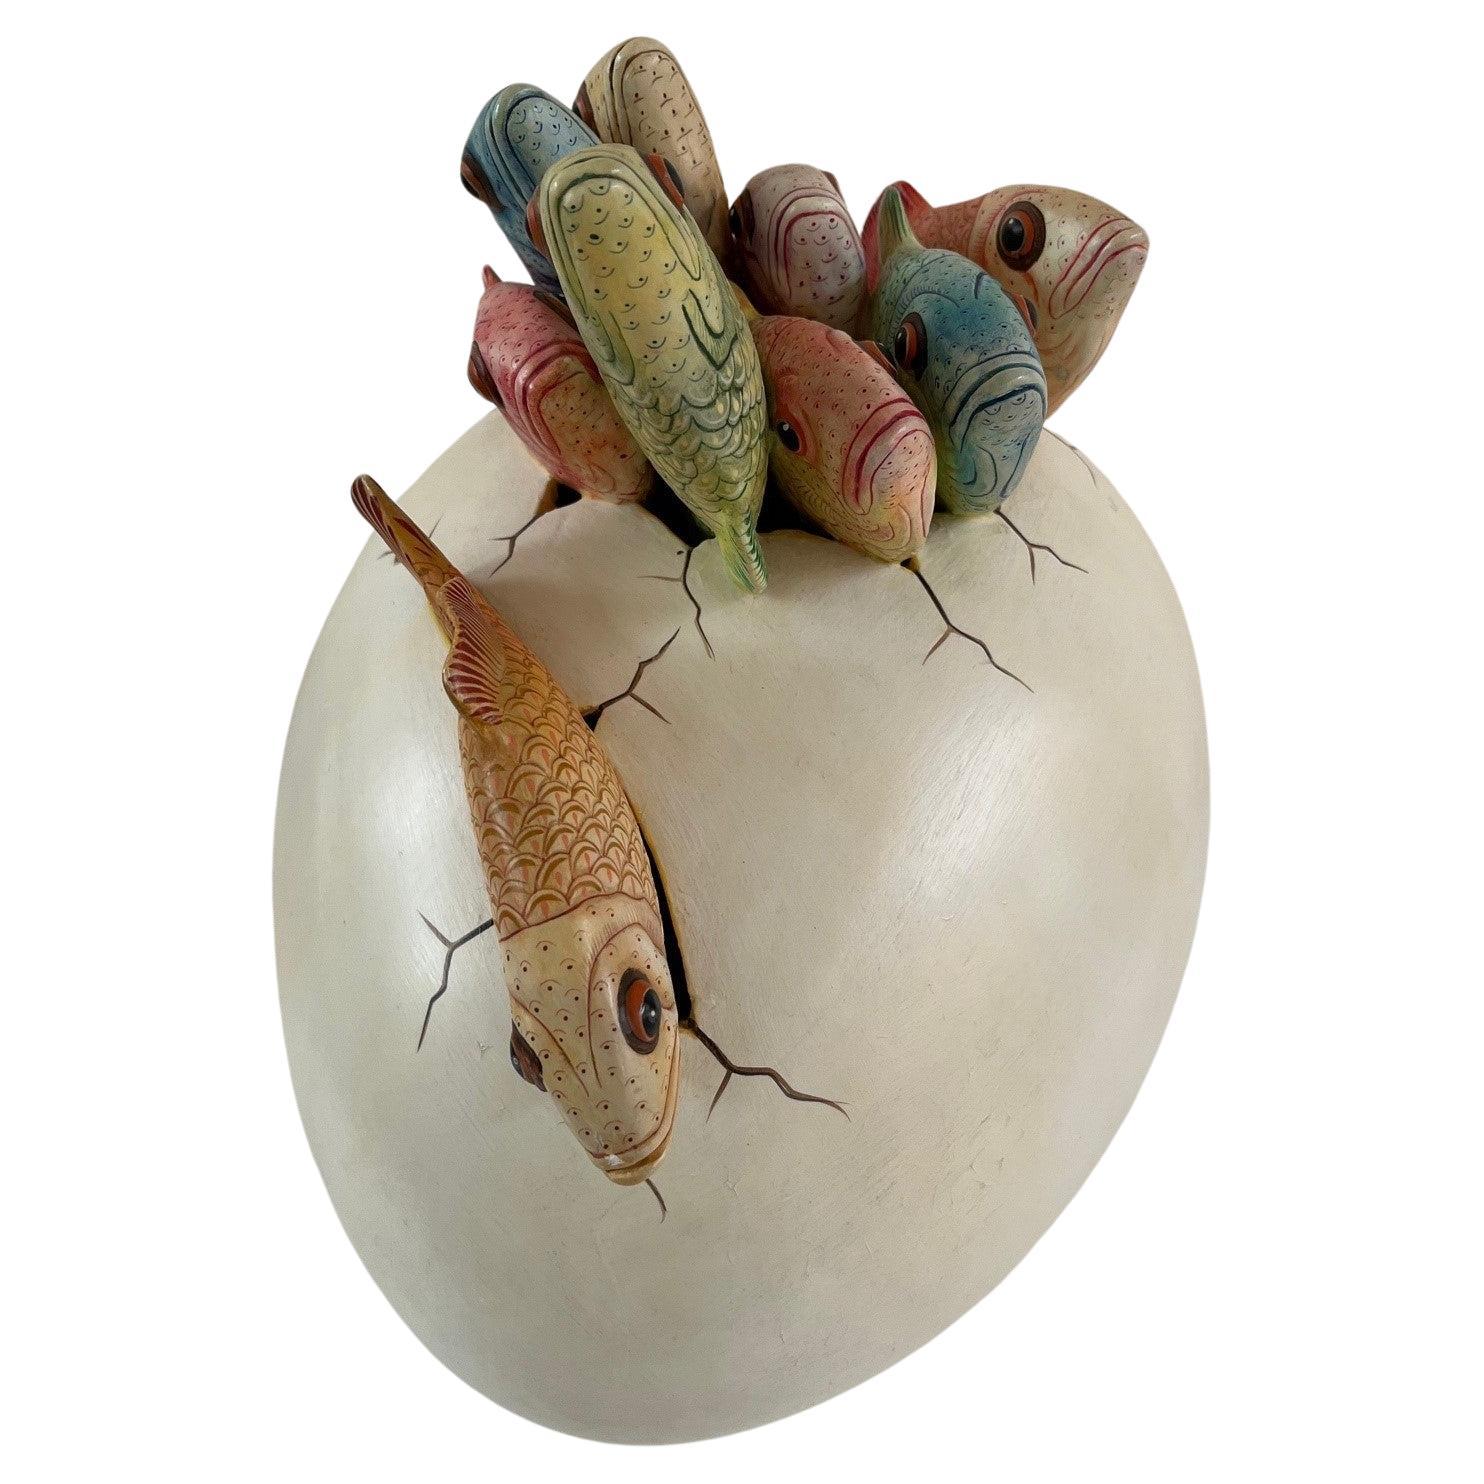 Vintage Large Ceramic Hatching Fish Egg Sculpture Figuring by Sergio Bustamente. For Sale